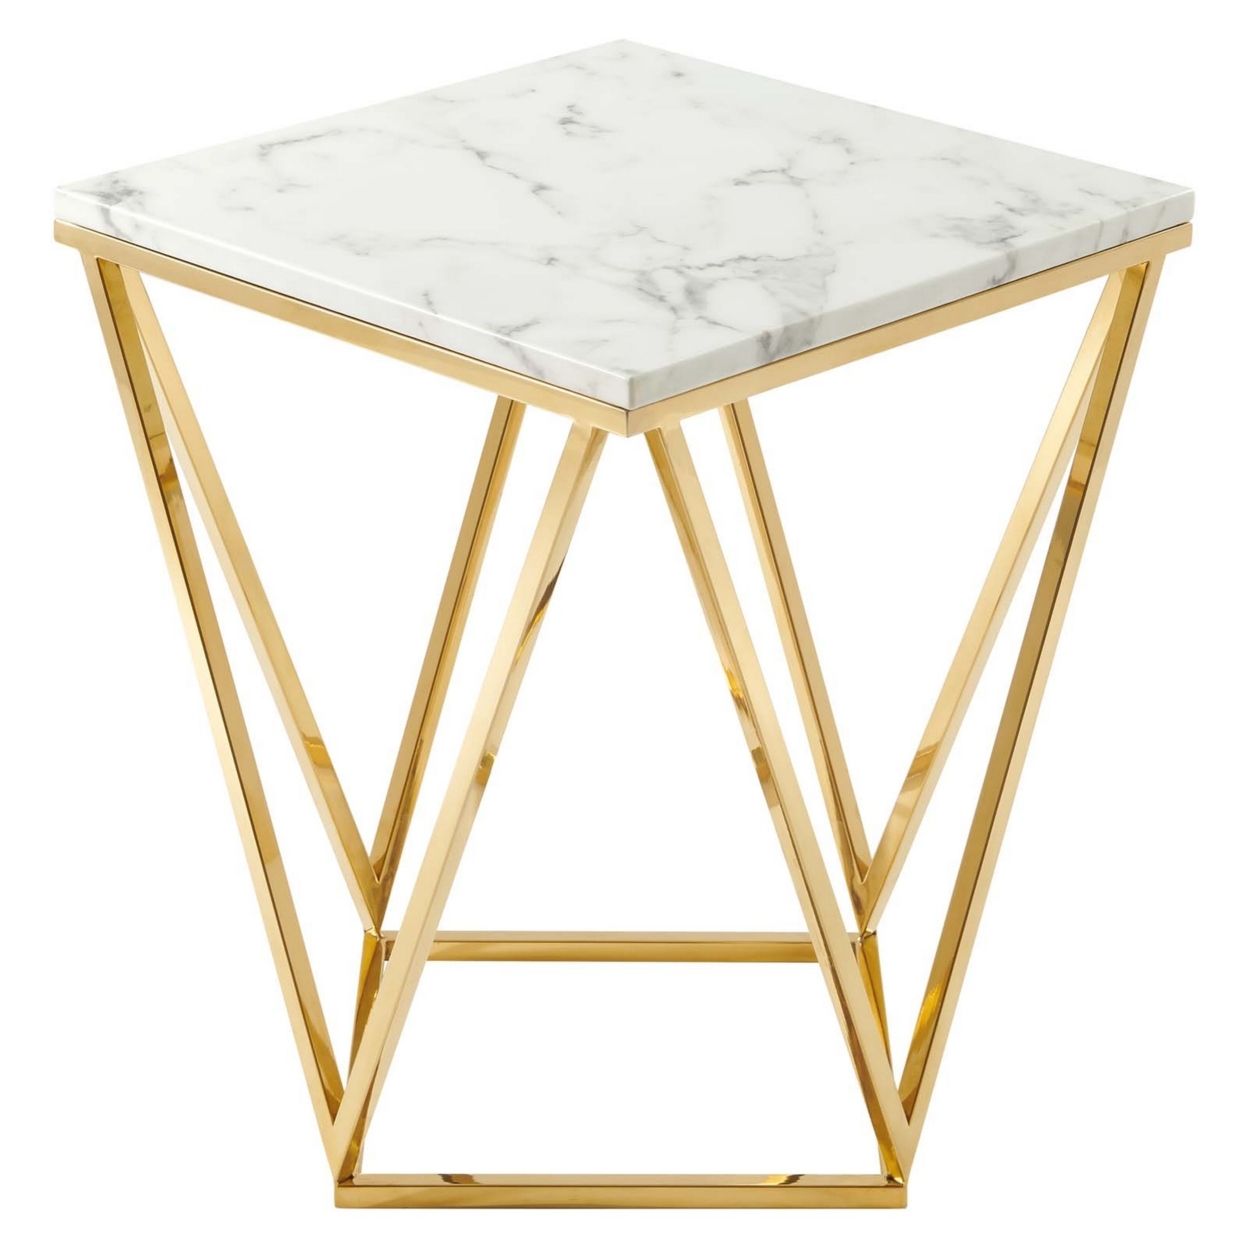 Vertex Gold Metal Stainless Steel End Table, Gold White